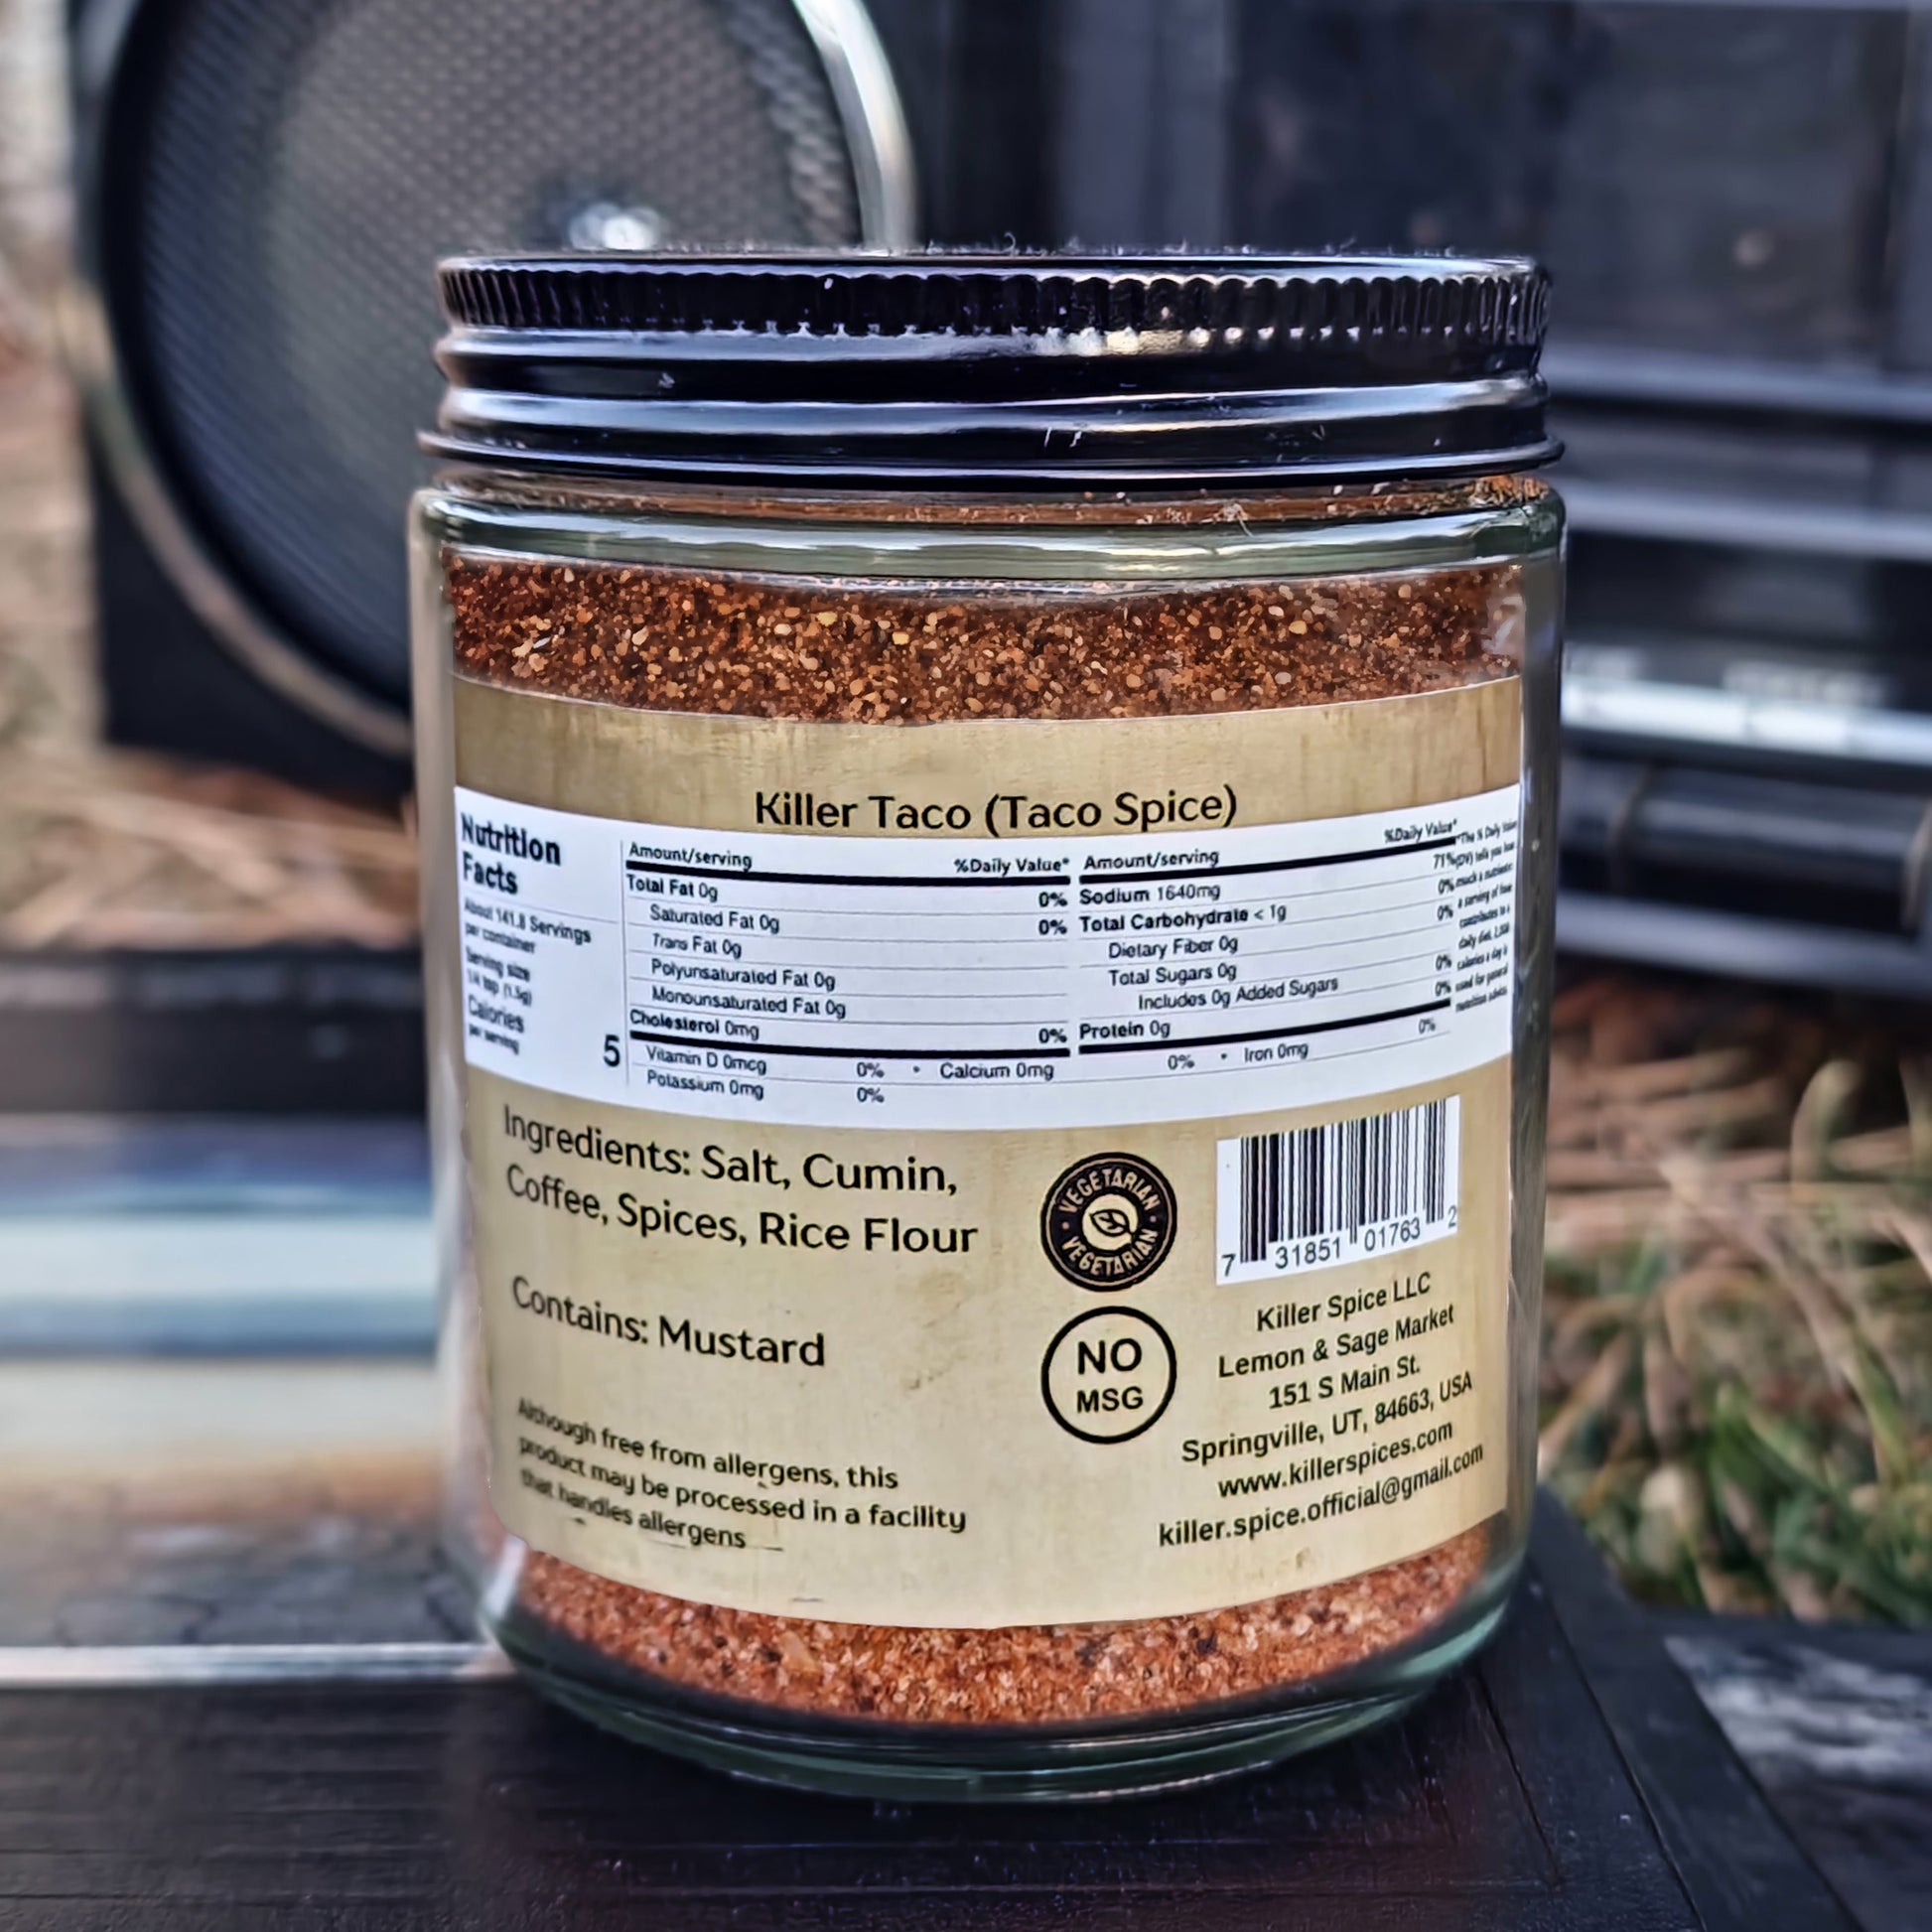 A jar of Killer Spice taco seasoning blend with ingredients and nutritional facts visible on the label, perfect for enhancing Mexican cuisine.